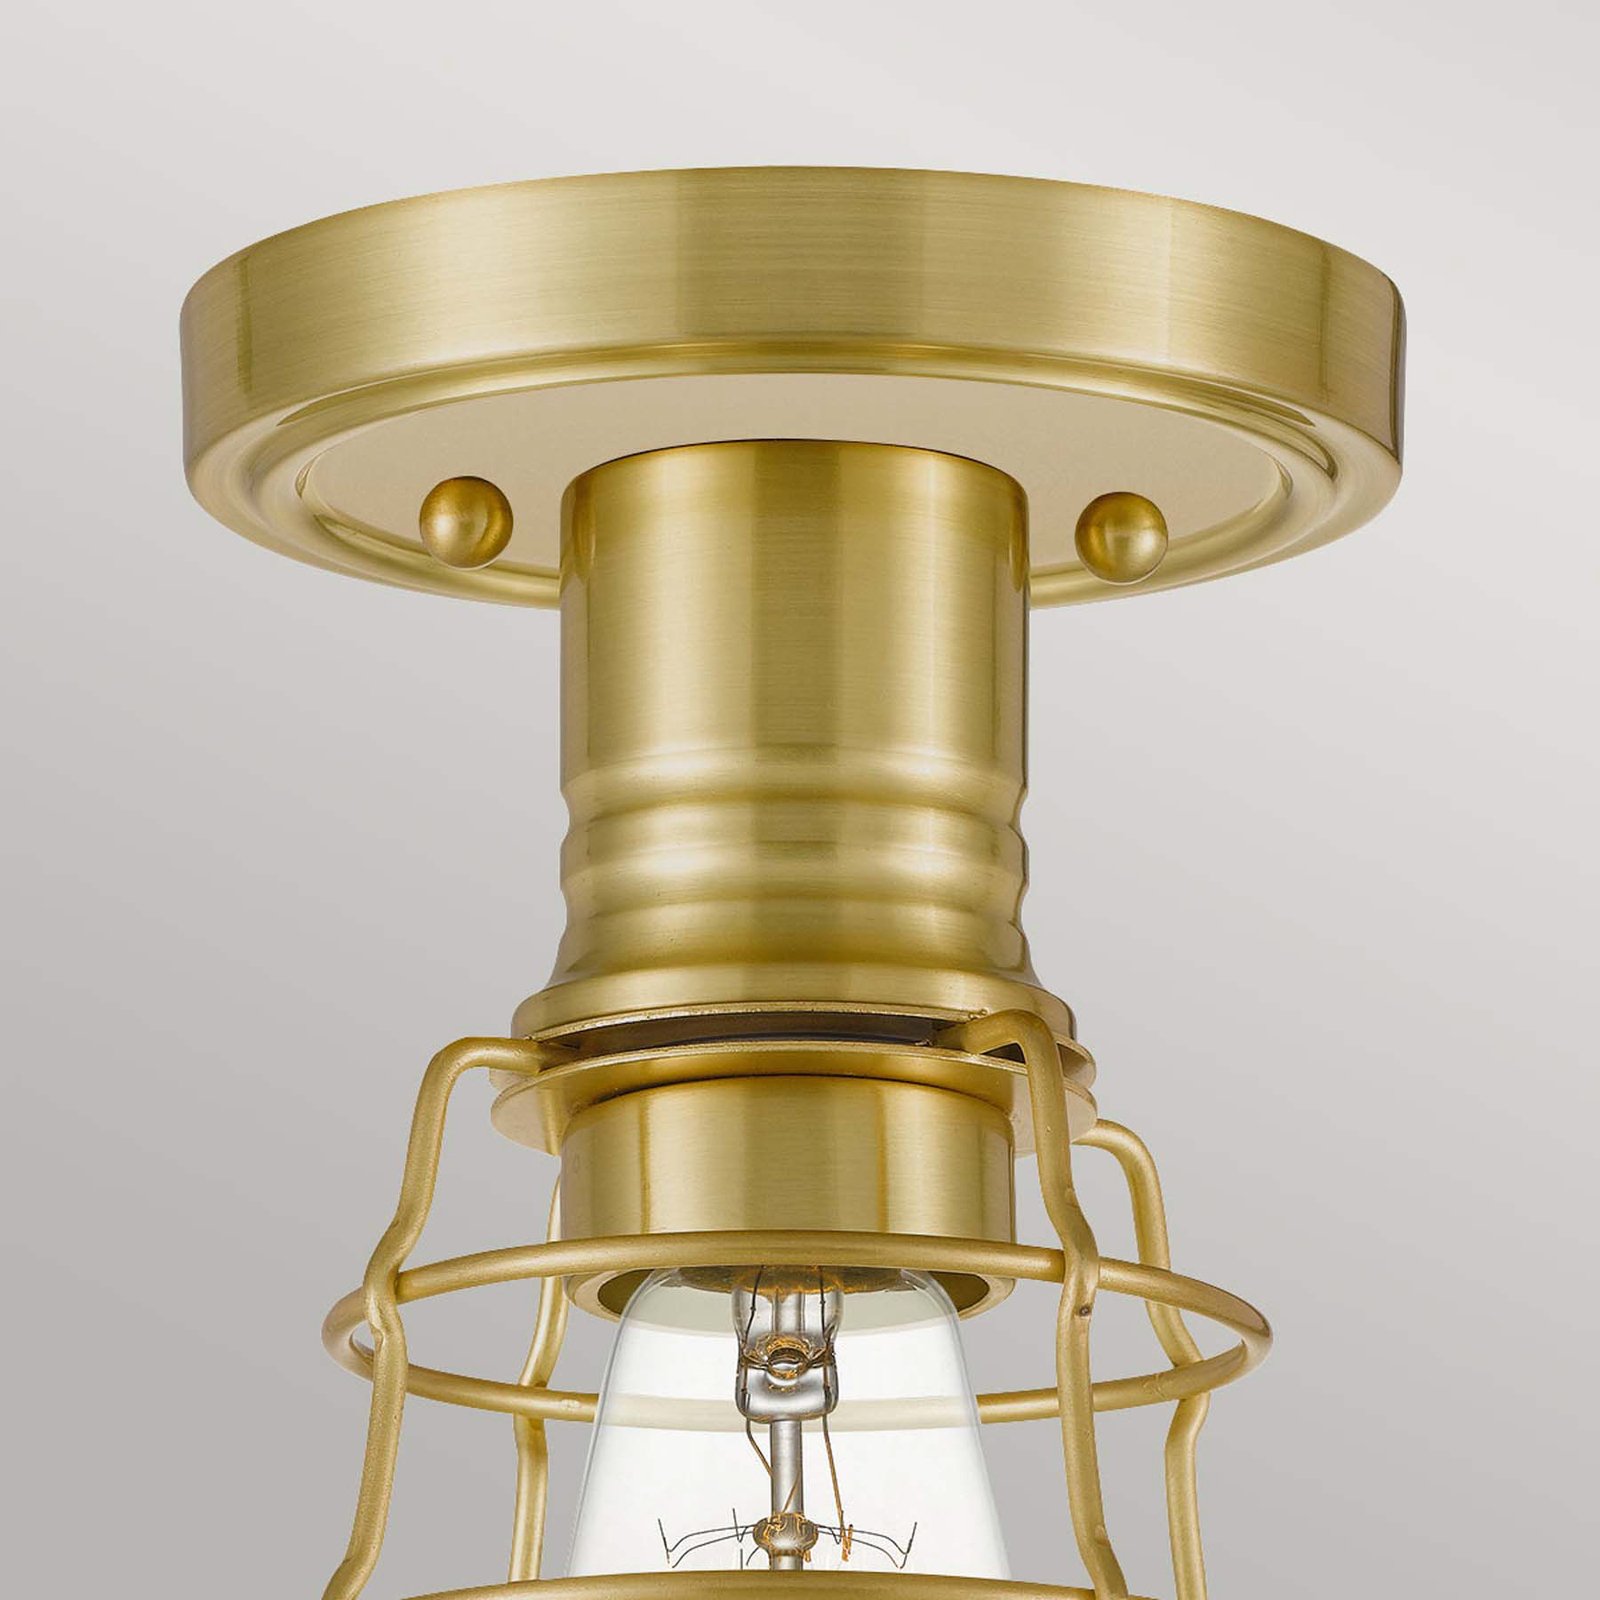 Mite ceiling light with metal cage, brushed brass